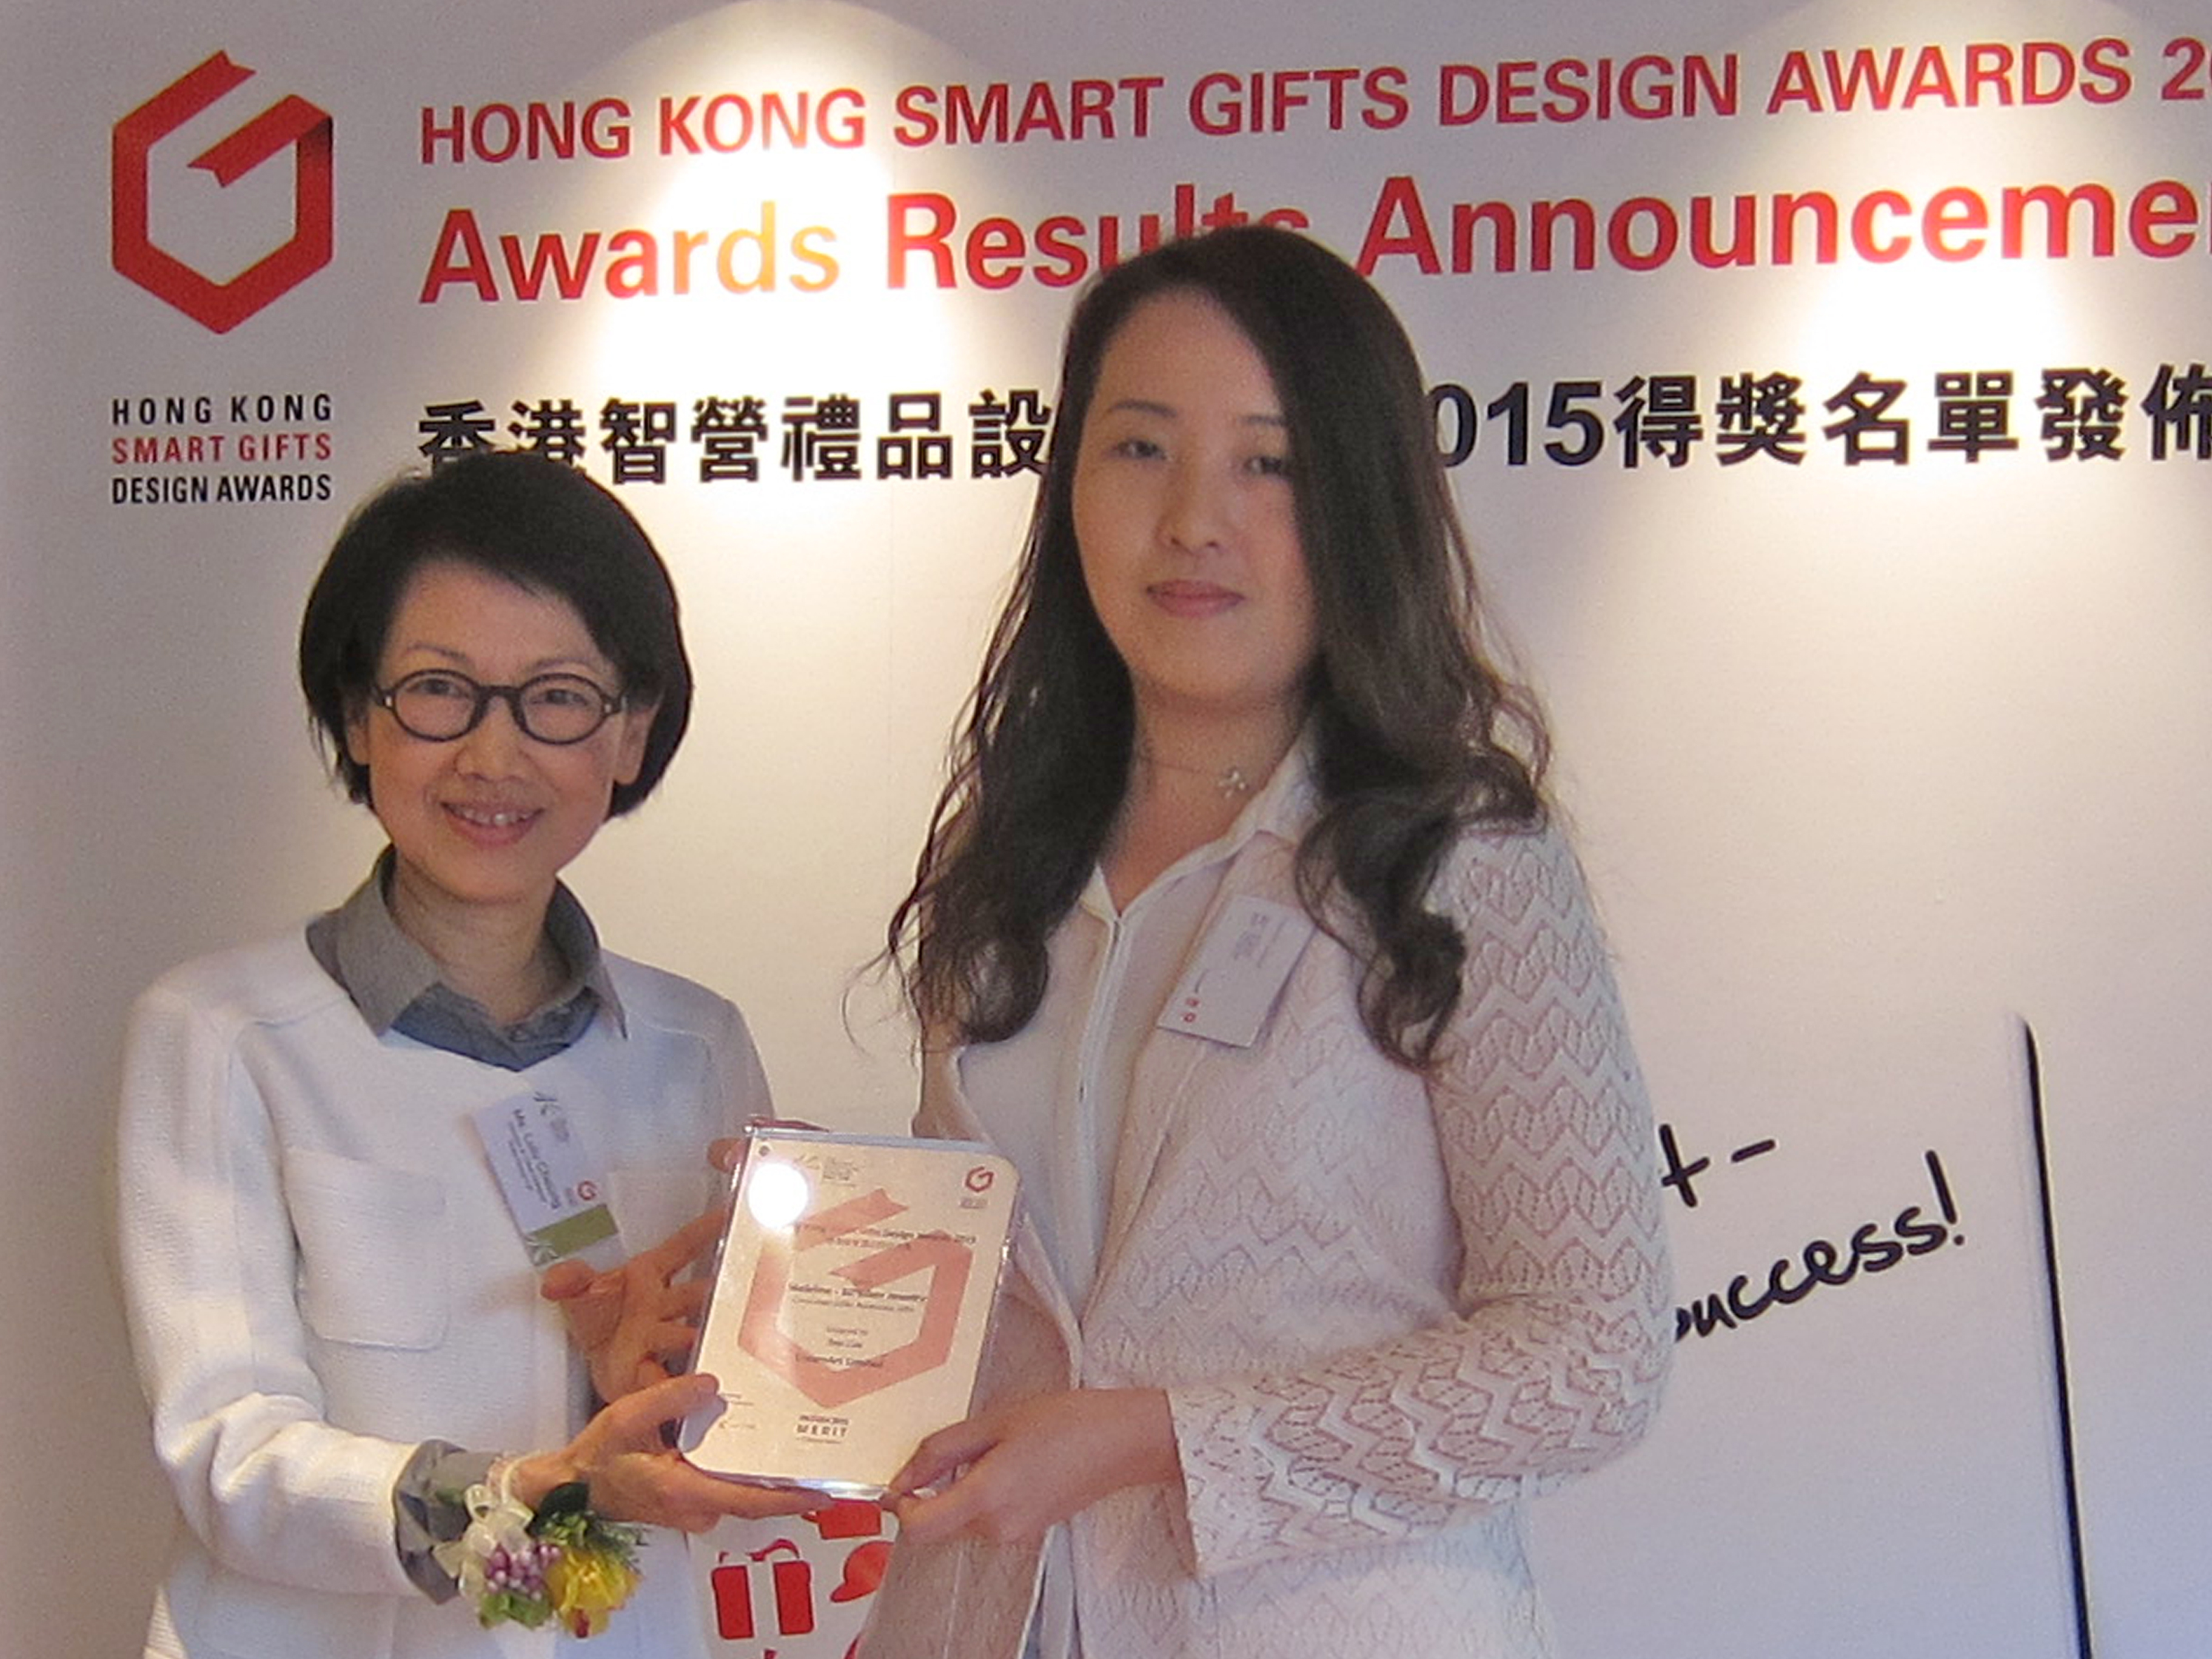 Ms. Joey Lau, IDSHK Member (Right) and Ms. Lu Lu Cheung, Founders & Creative Director of Rolls Group Ltd. (Left)